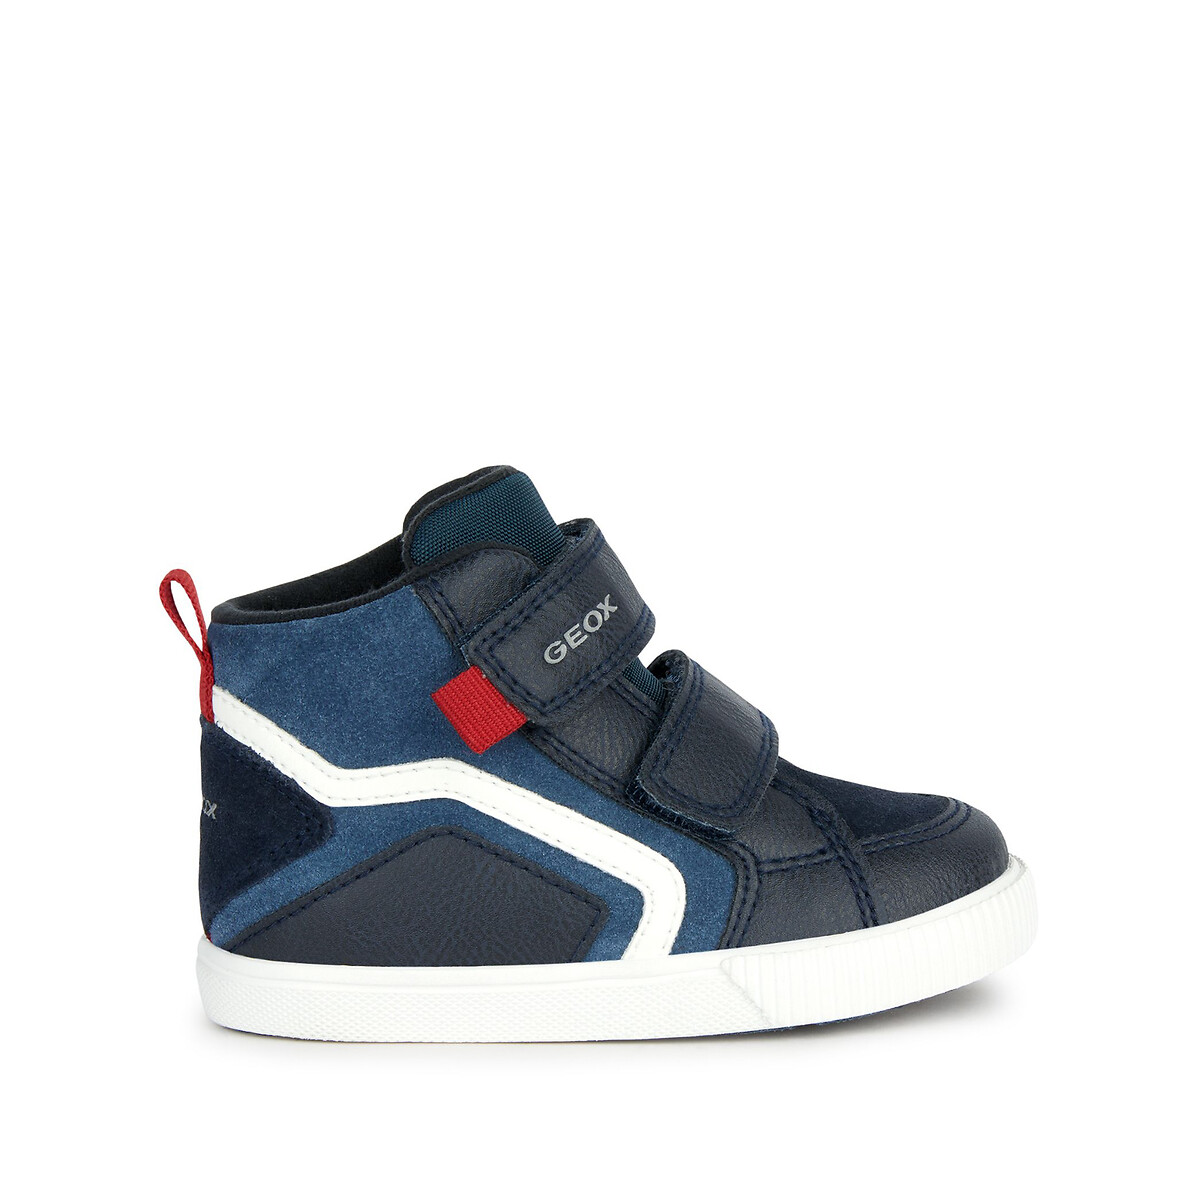 Image of Kids Kilwi Breathable High Top Trainers with Touch 'n' Close Fastening